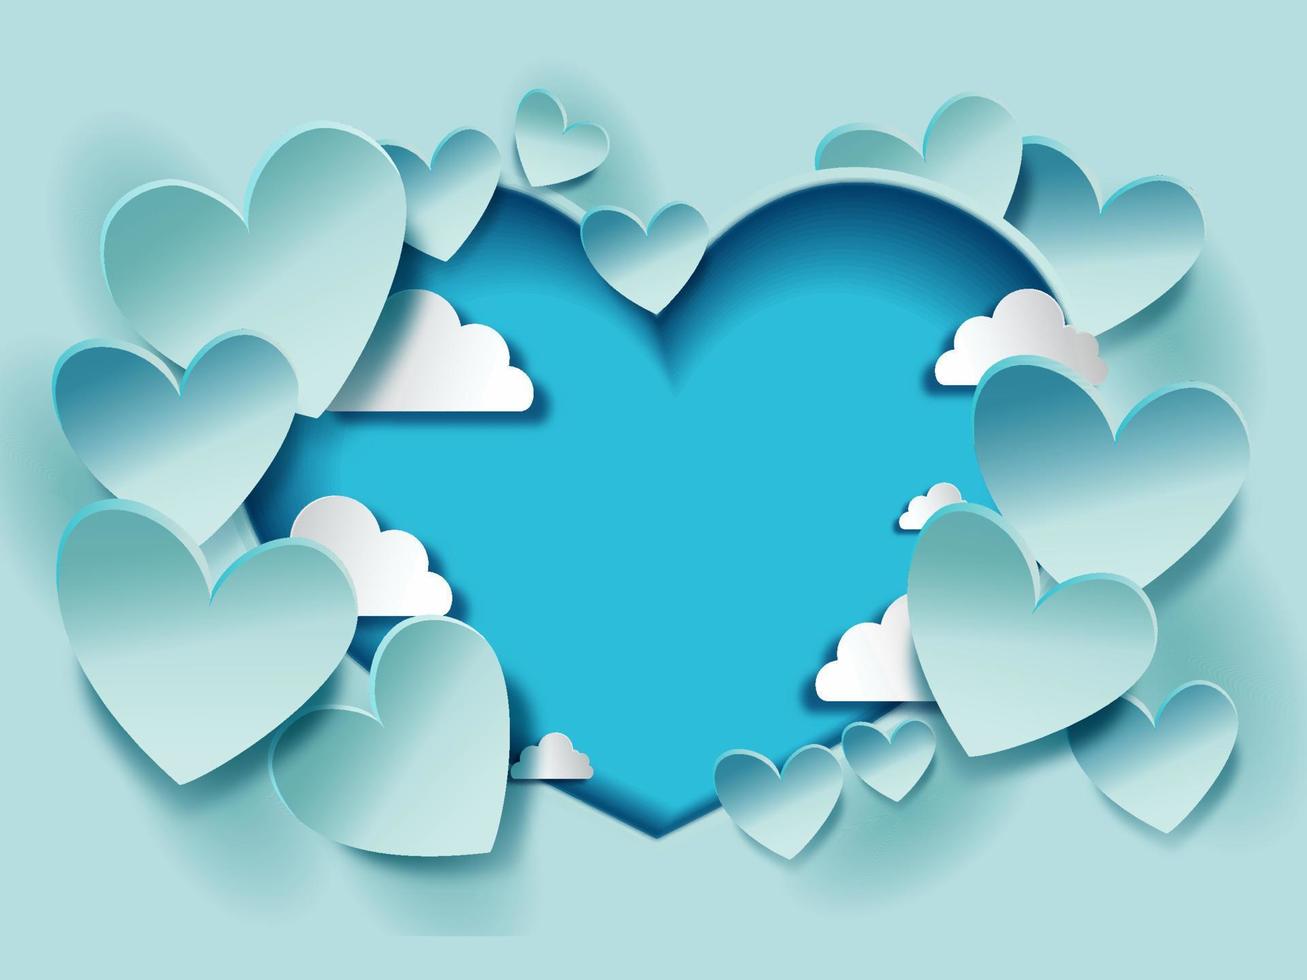 Pastel Blue Paper Heart Shapes With Clouds Decorated Background And Space For Text Or Image. vector